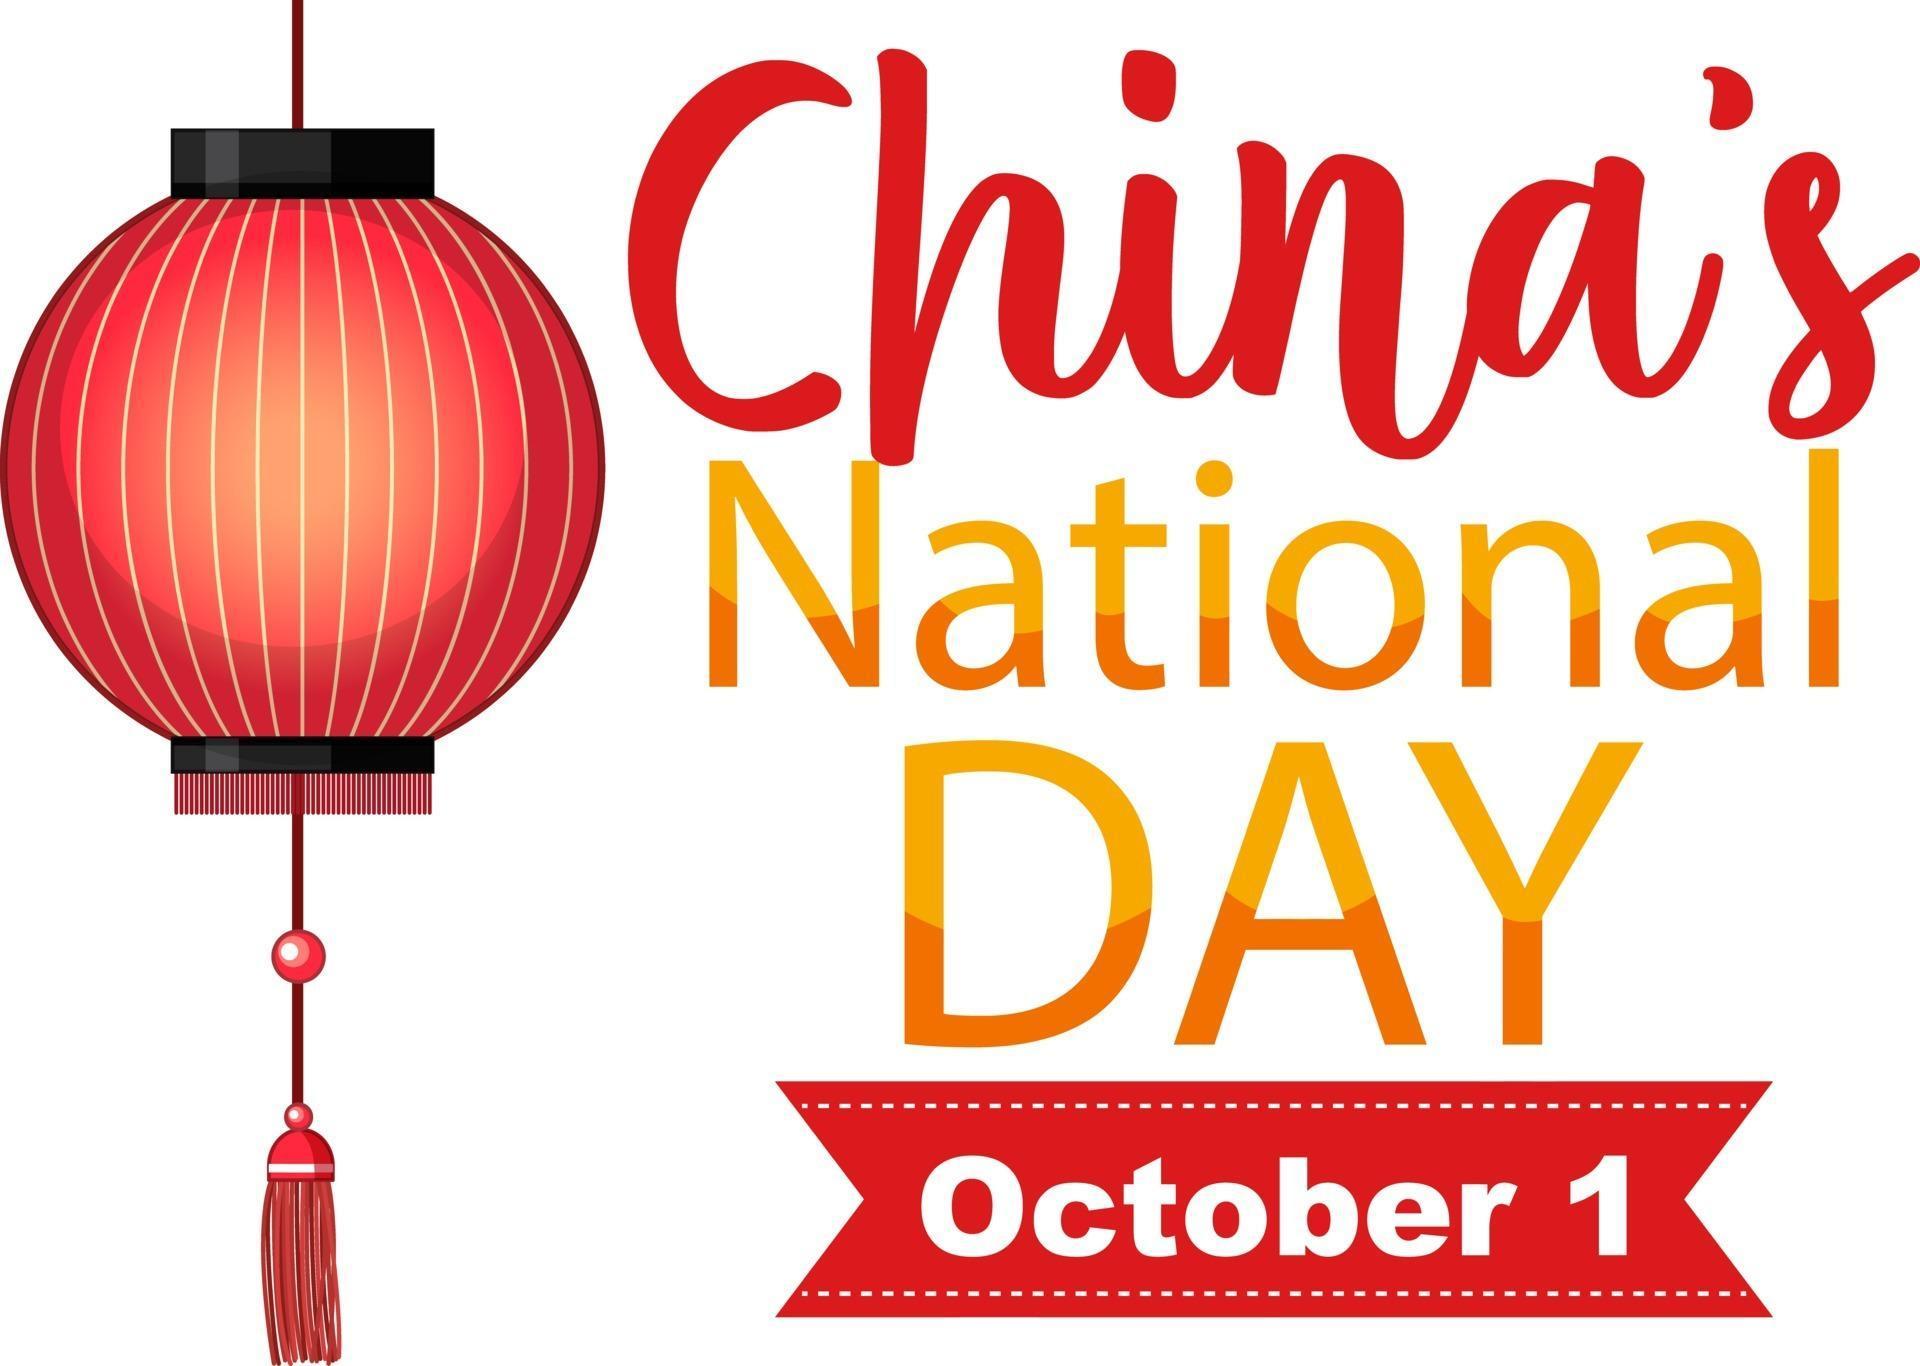 China's National Day banner with China lantern on white background